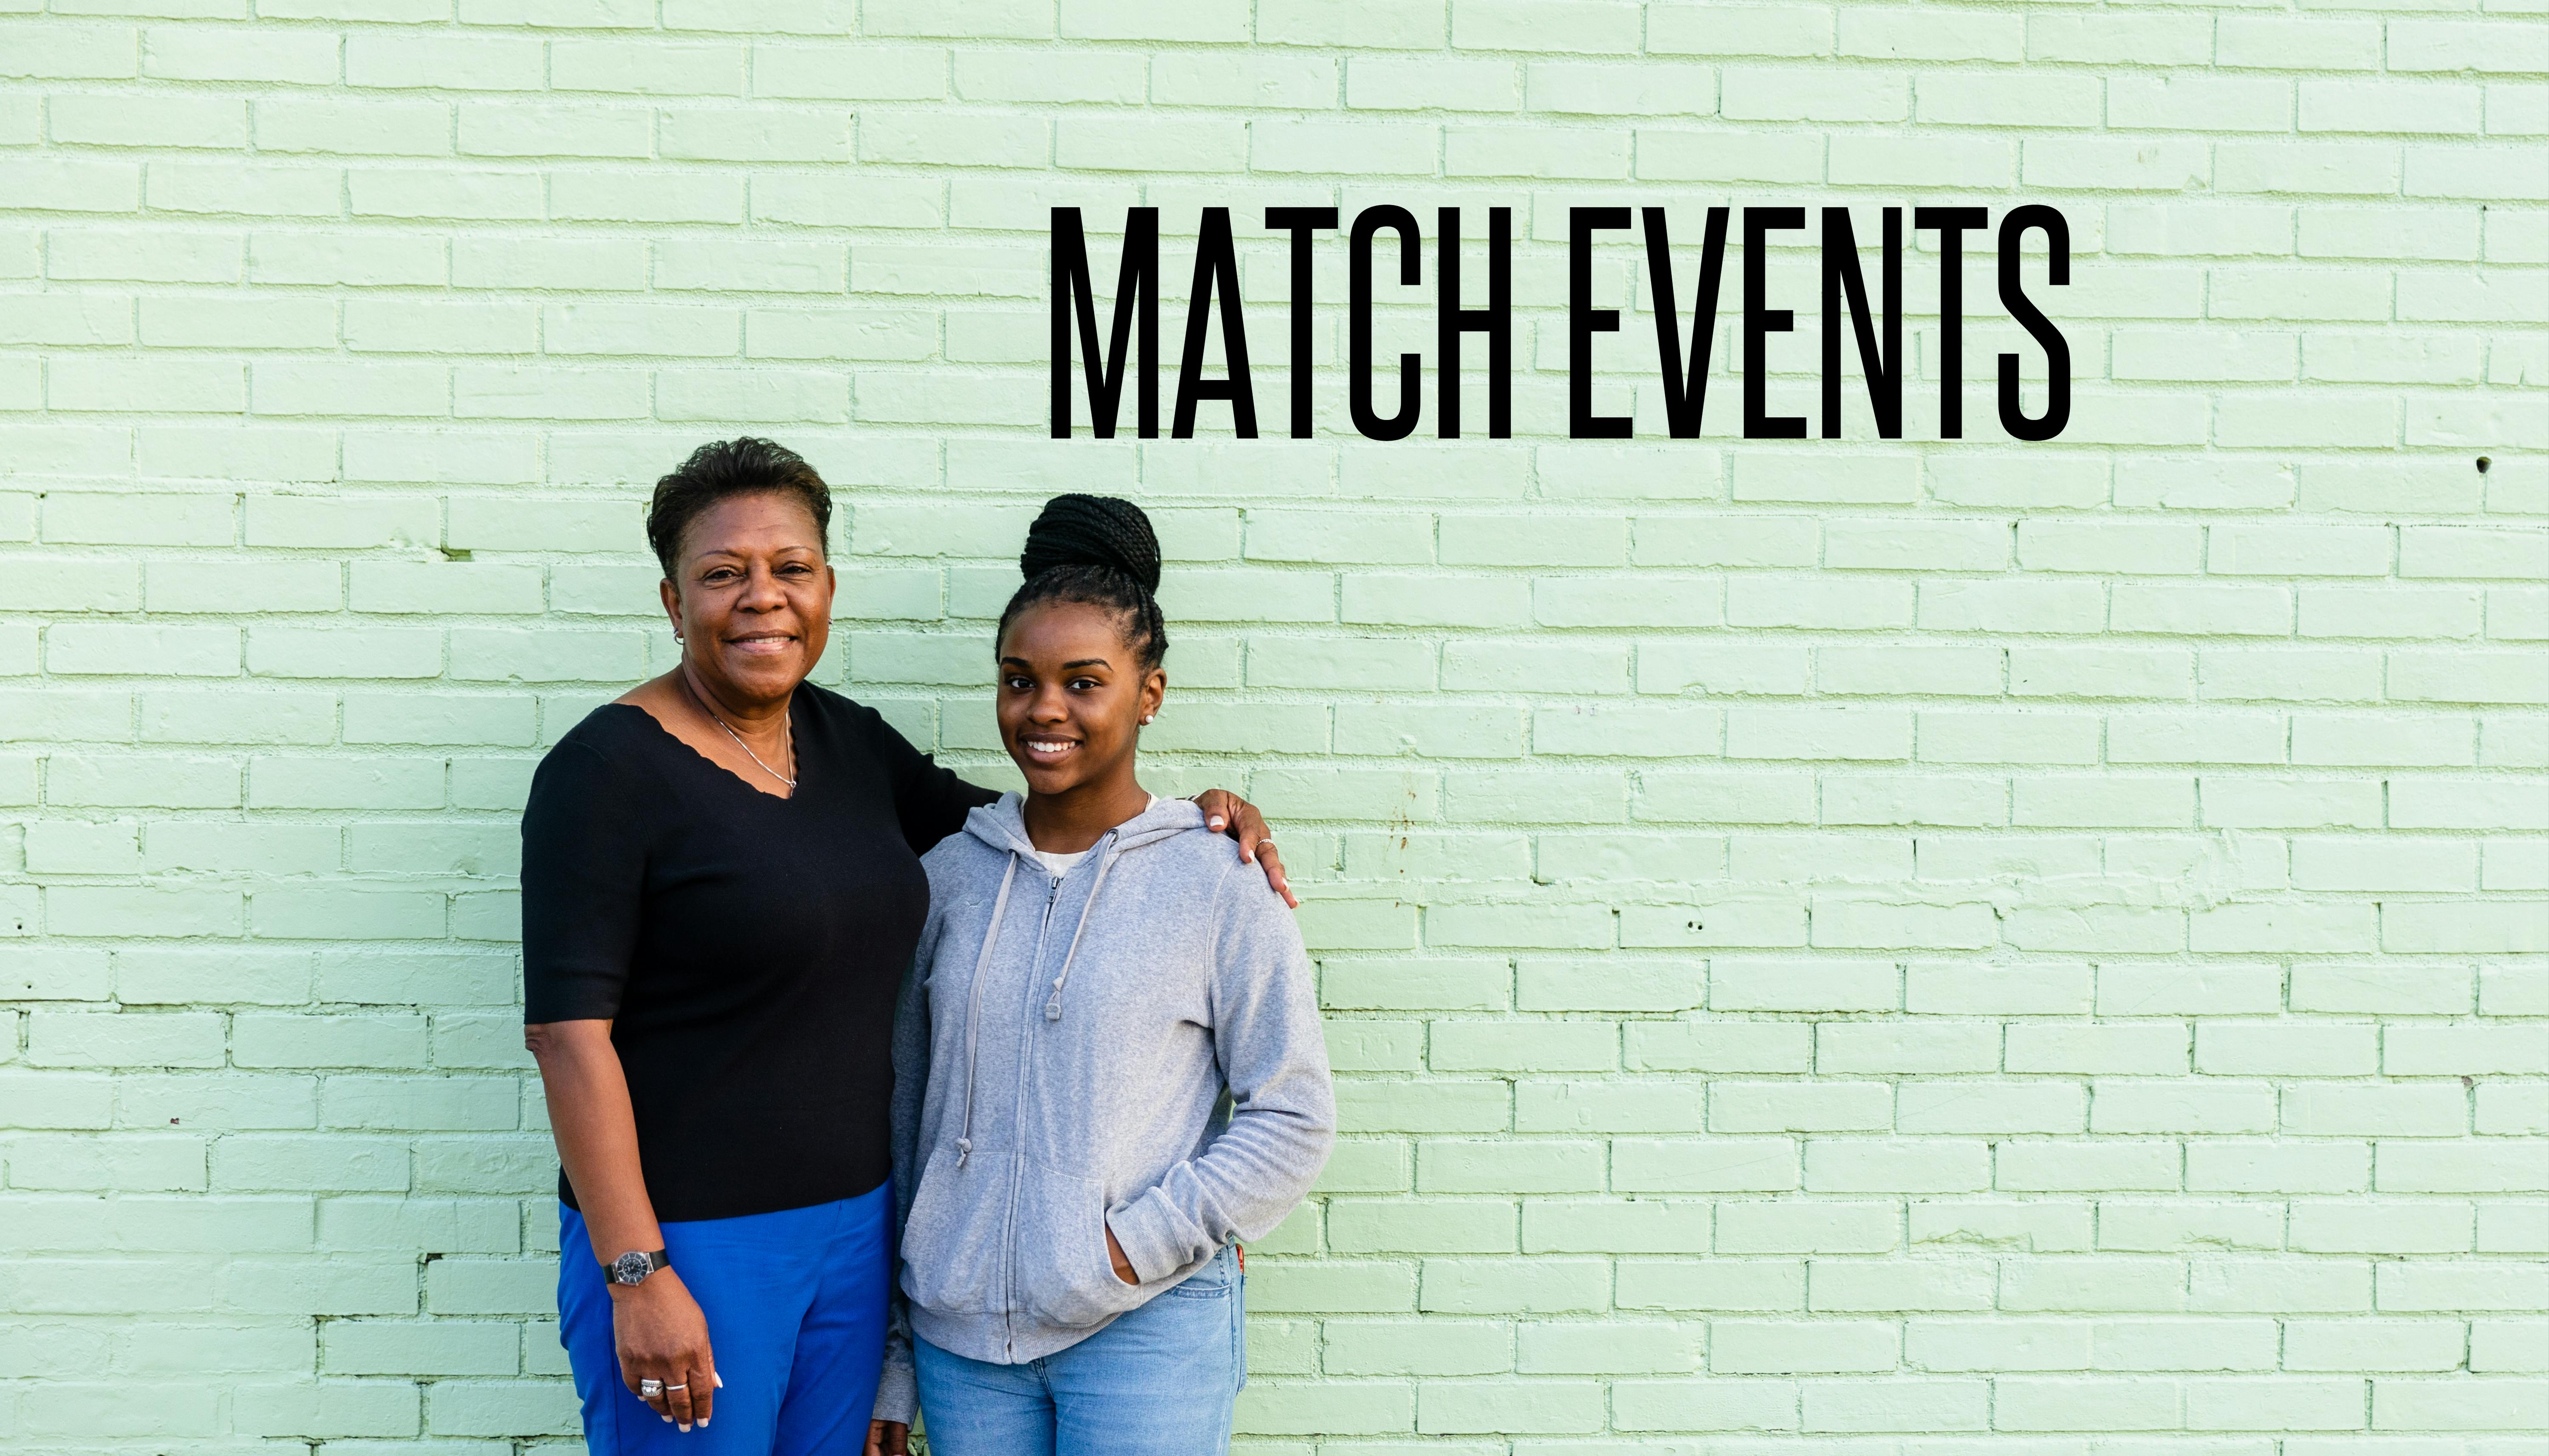 Houston Match &amp; Family Activities cover image